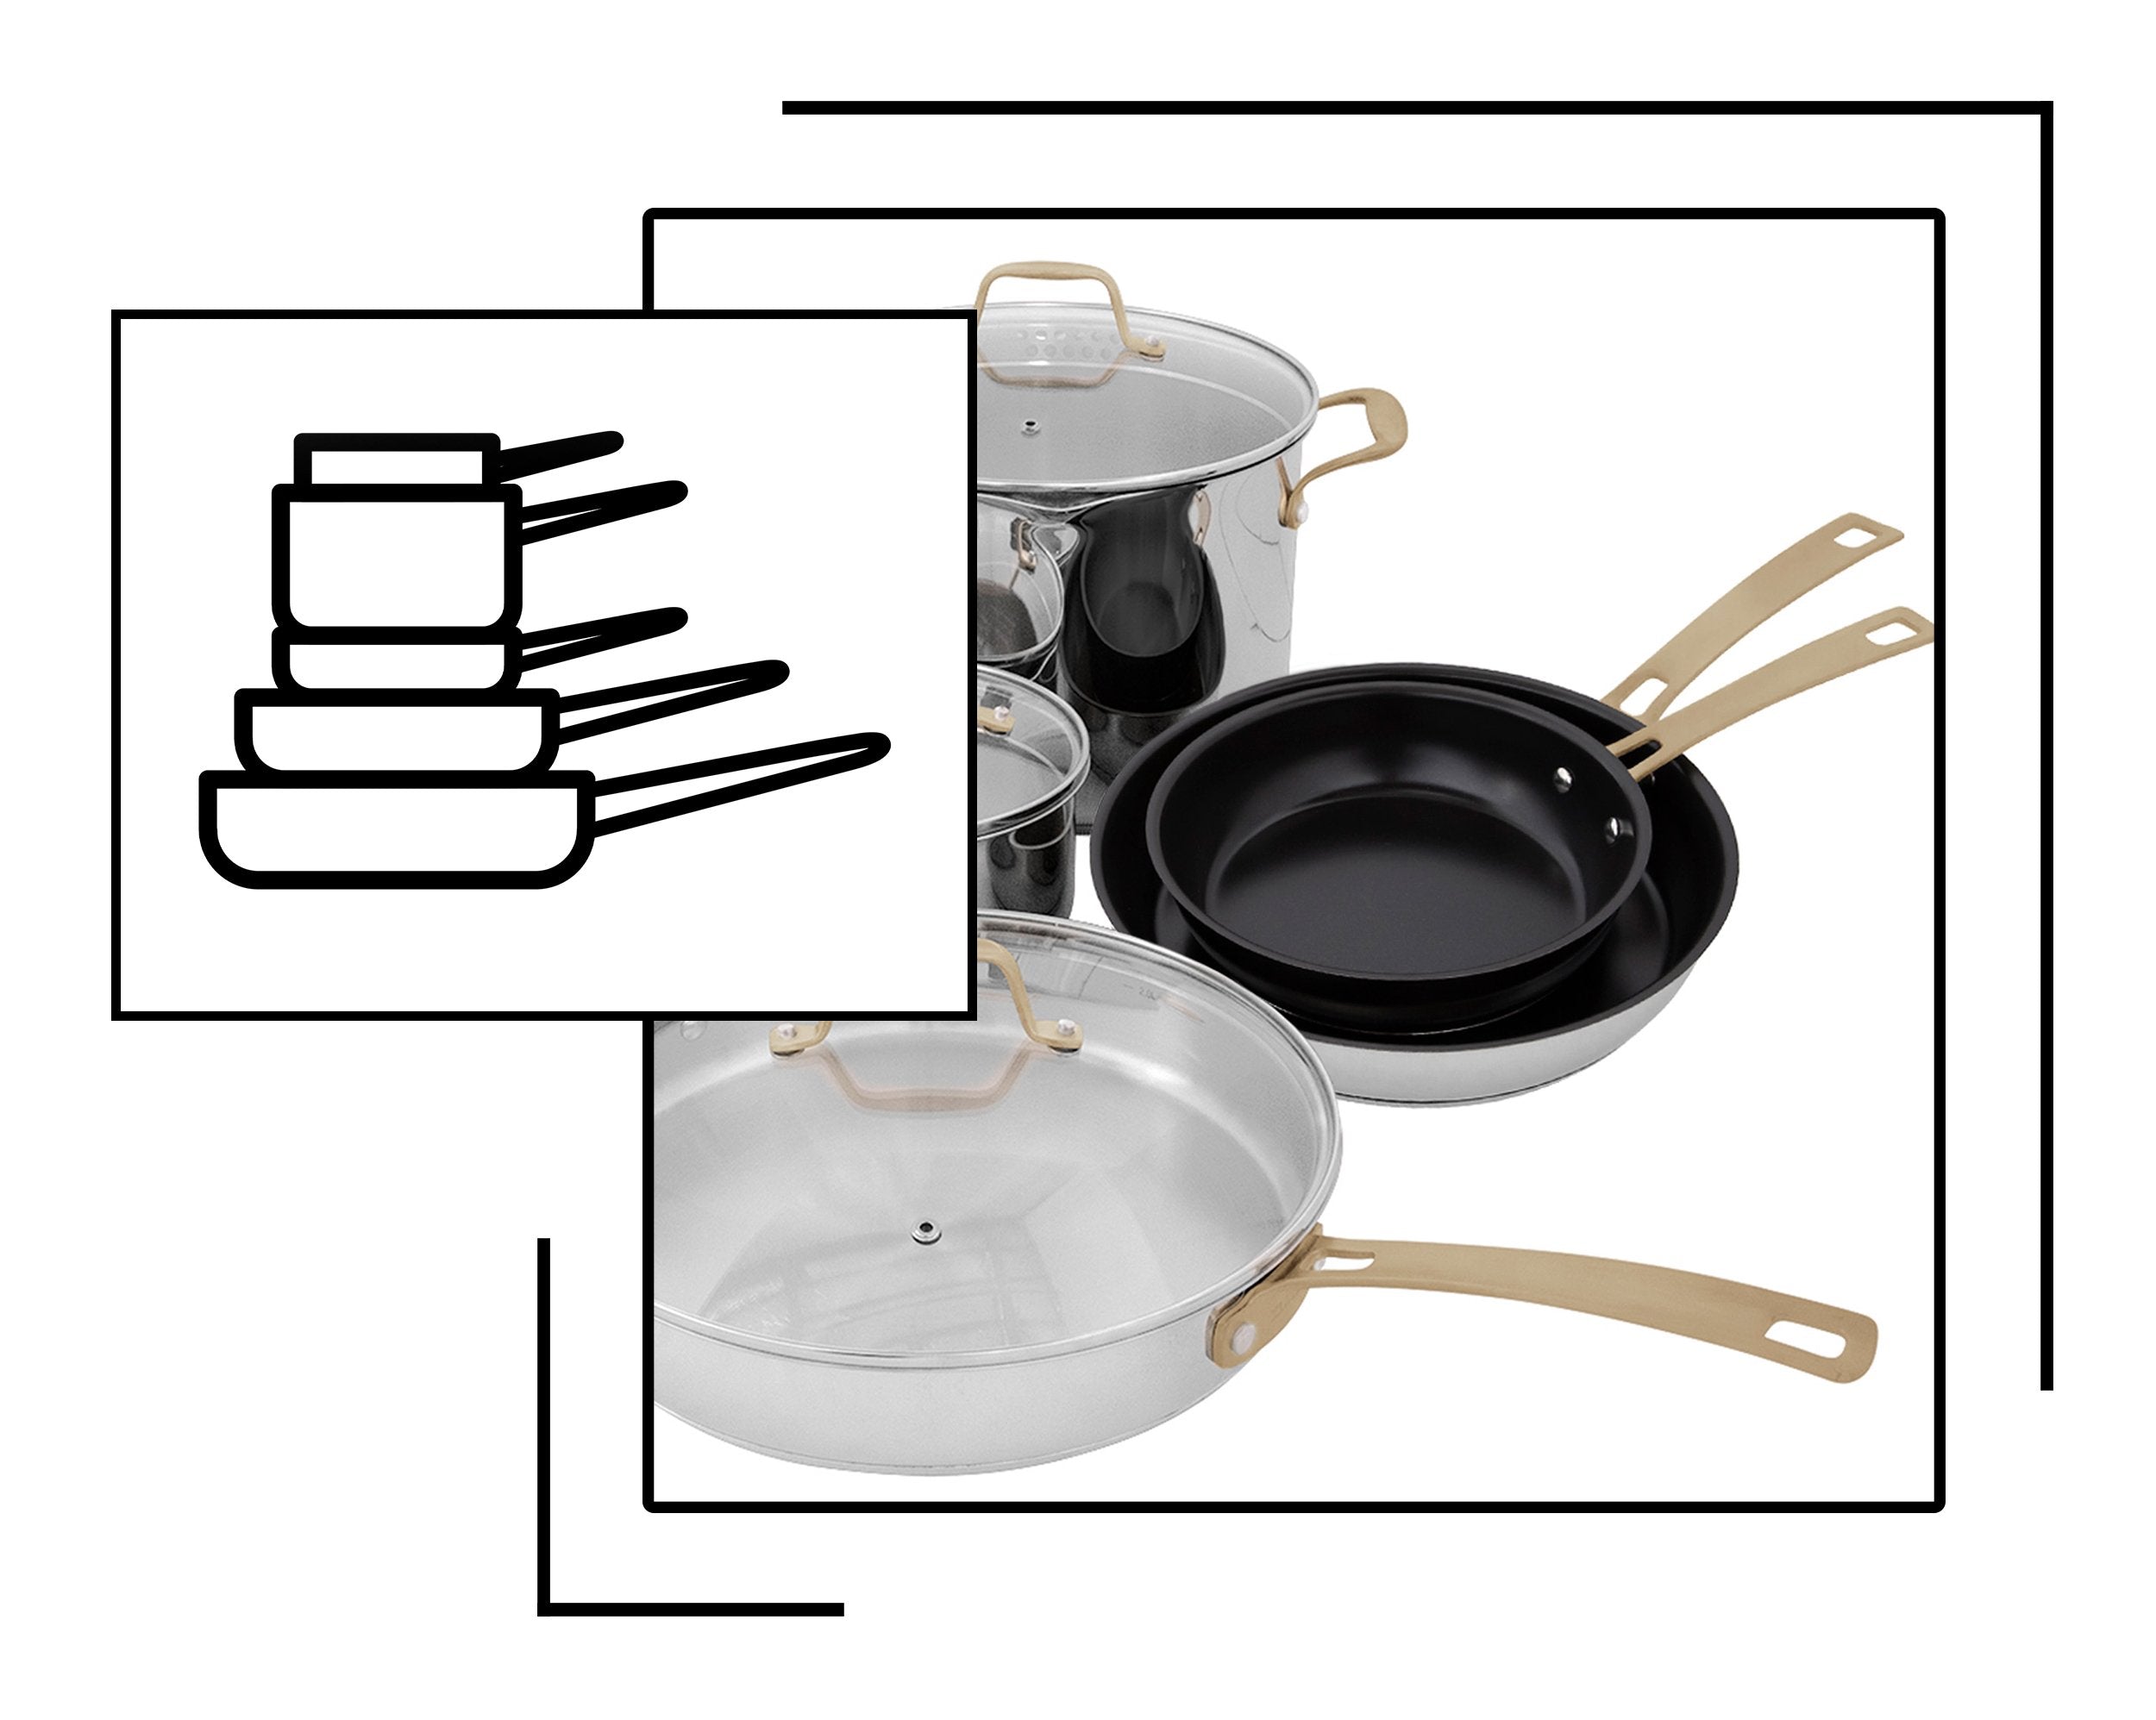 Icon and image representing complete cookware set